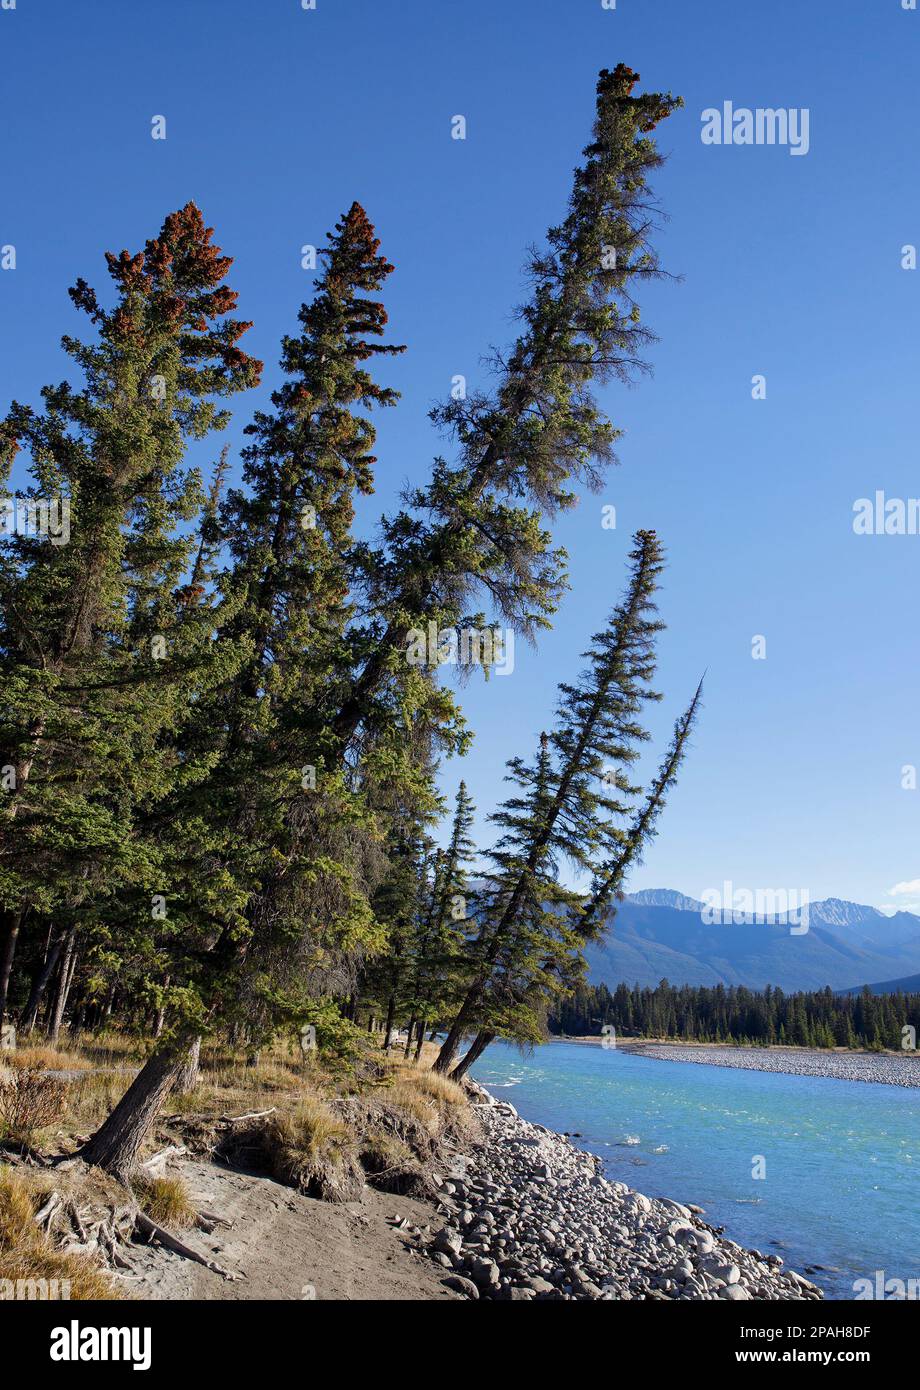 Spruce trees leaning over the Athabasca River bank with clear blue sky in Jasper National Park, Alberta, Canada Stock Photo